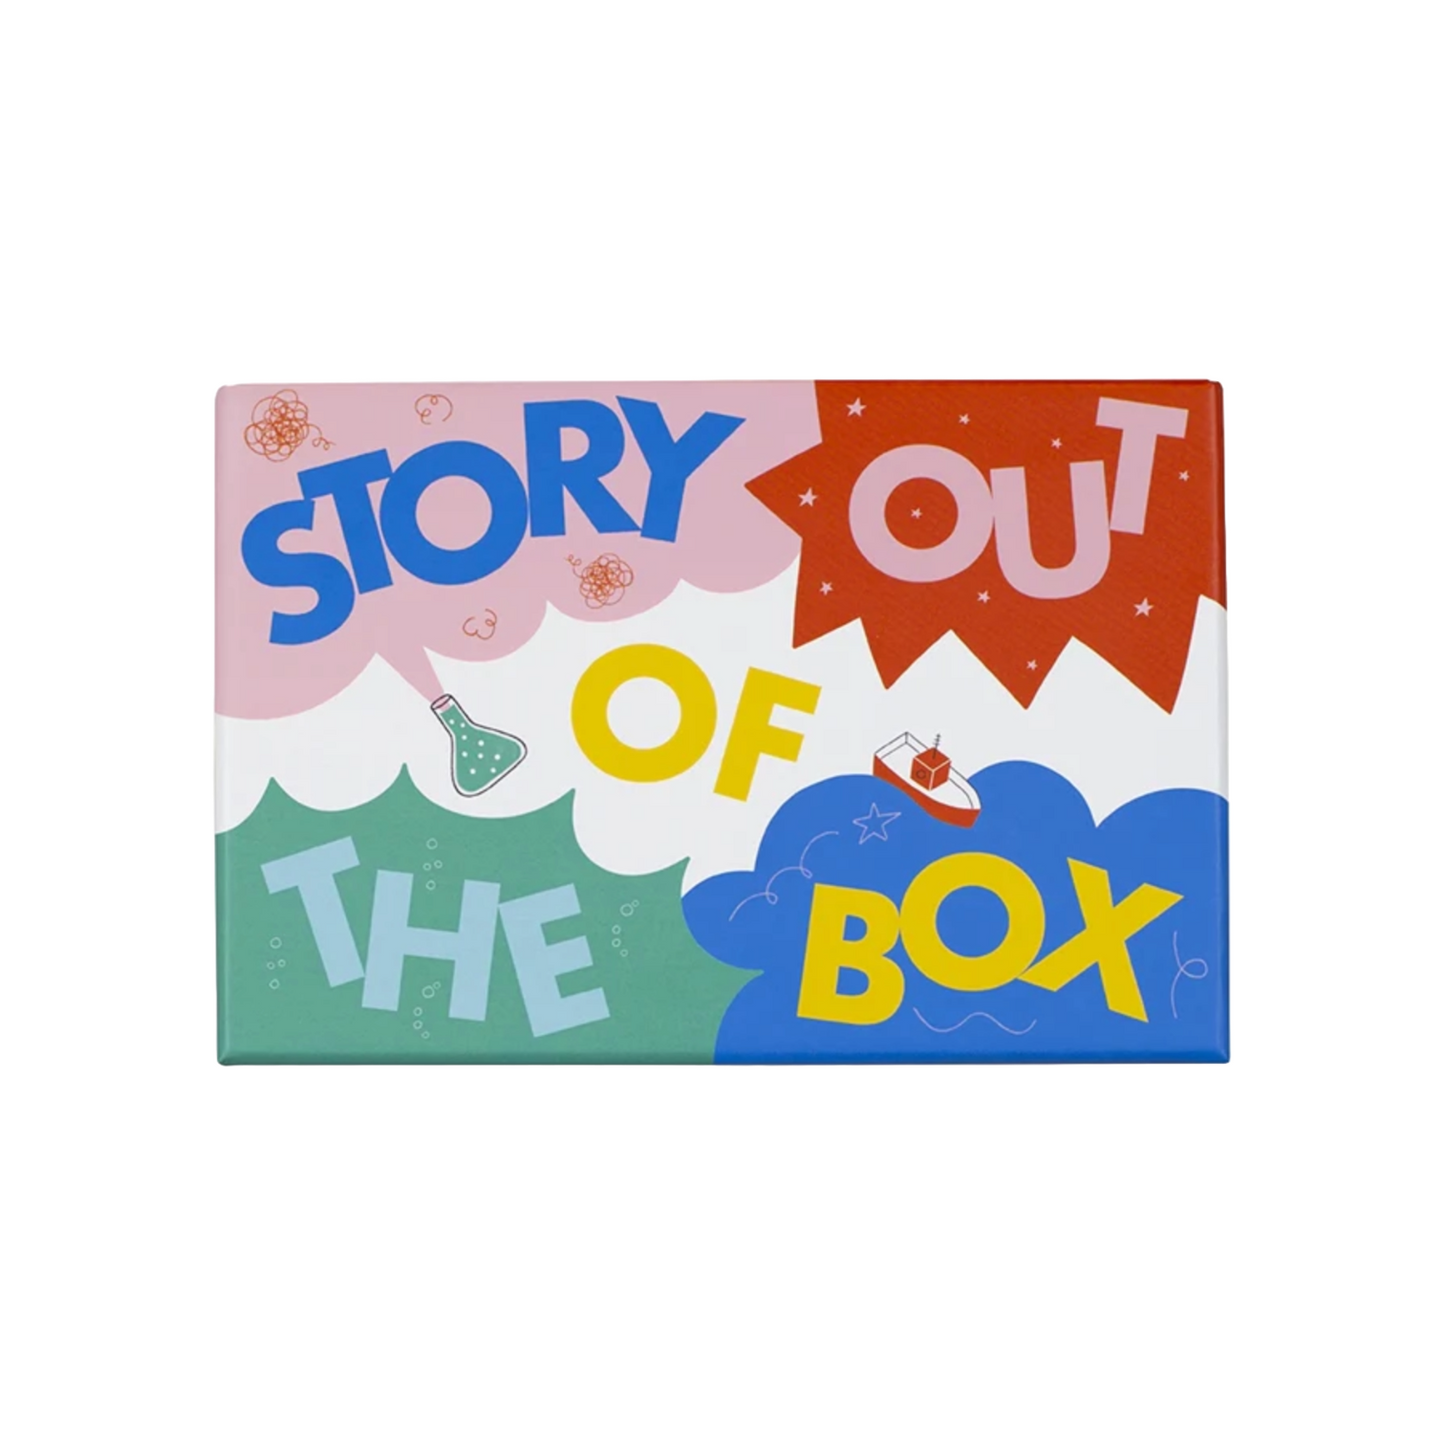 Story Out of the Box by  Nicky Hoberman and Leander Deeny